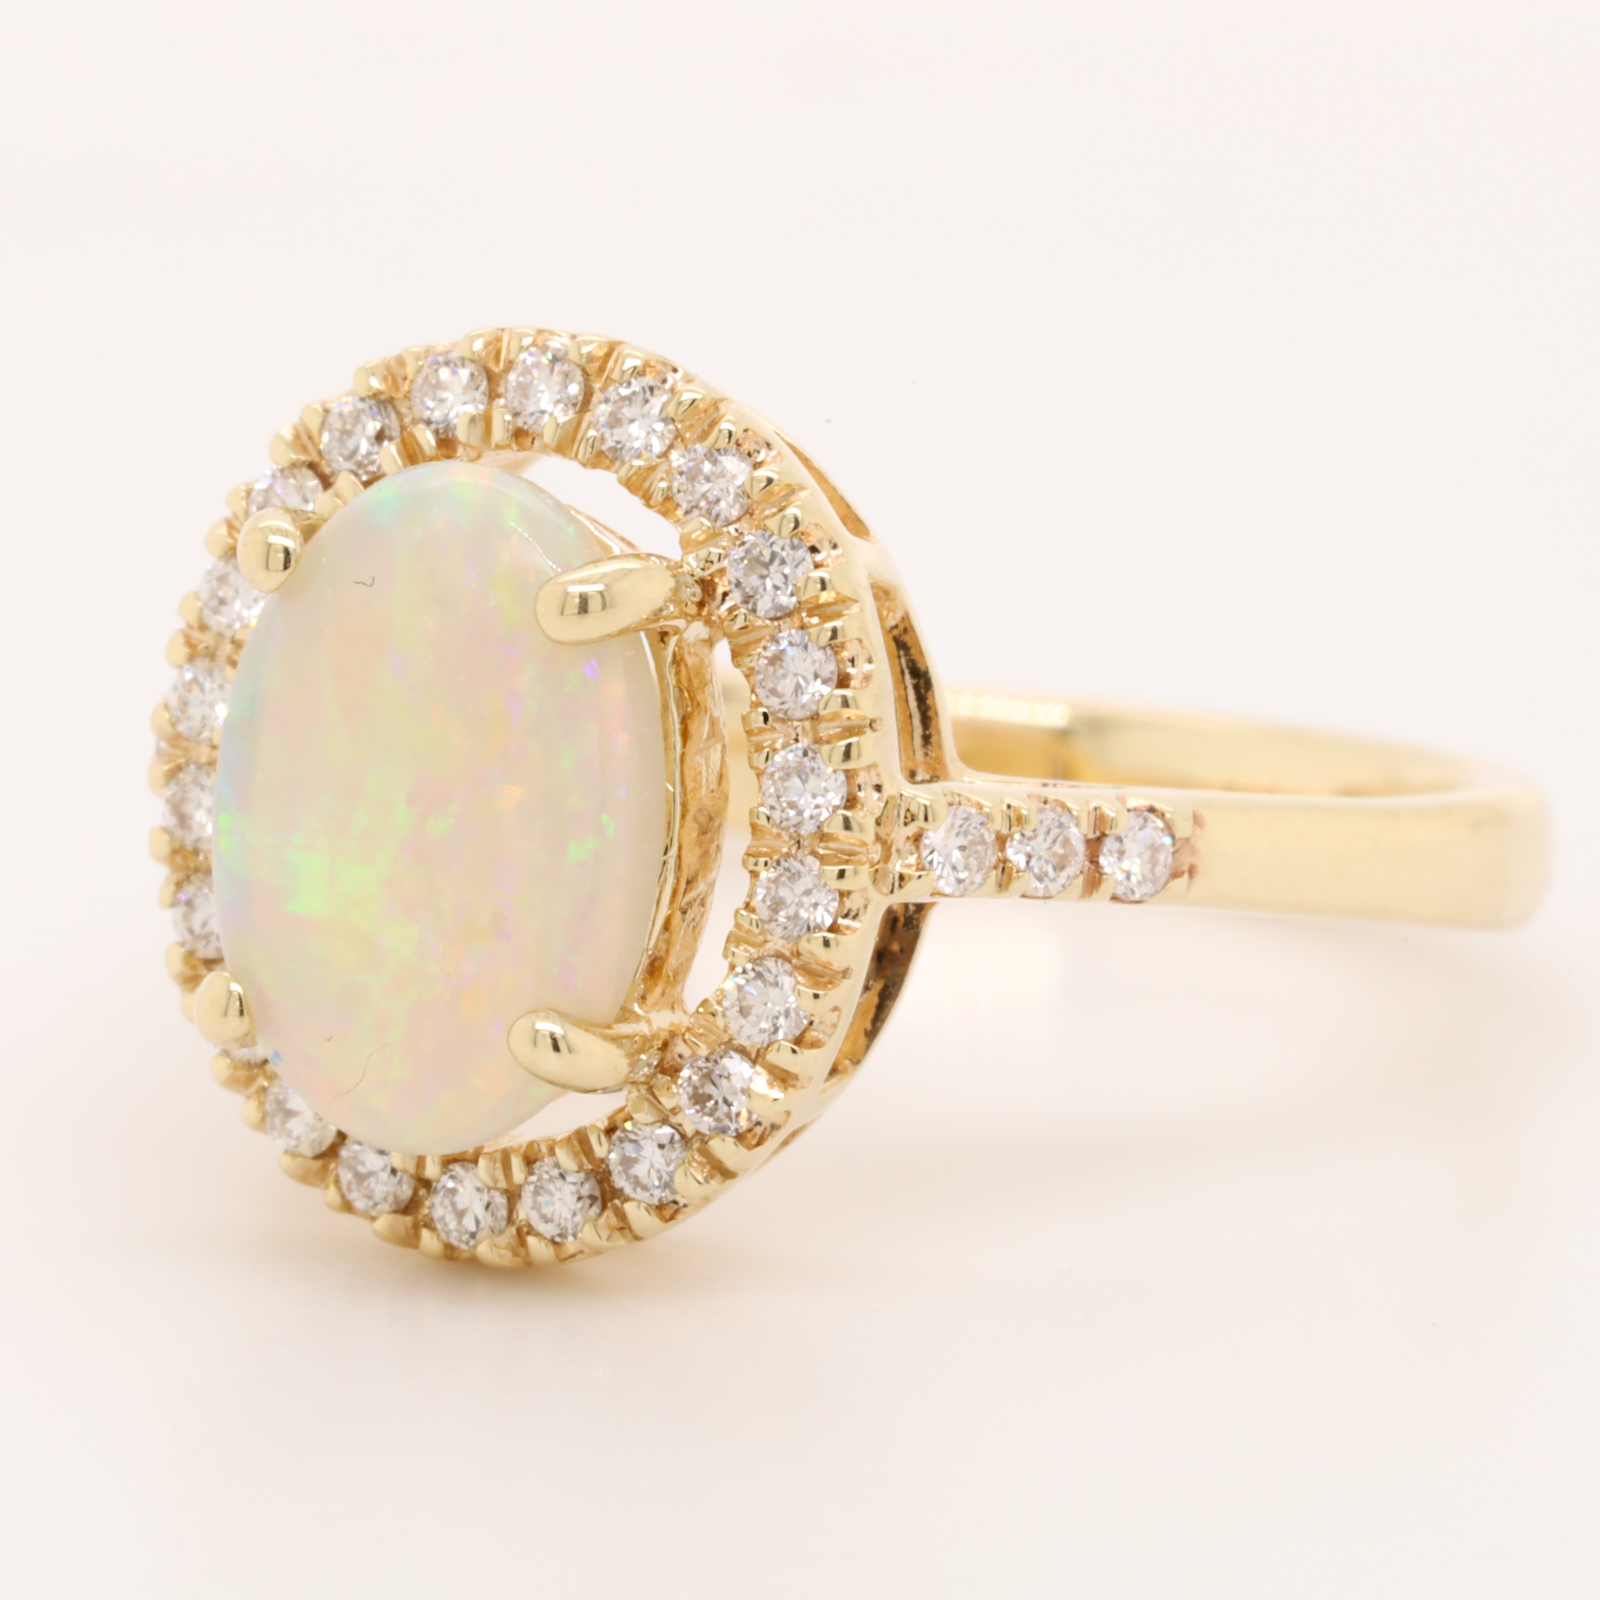 Blue Green and Orange Yellow Gold Solid Australian Crystal Opal Engagement Ring with Diamonds